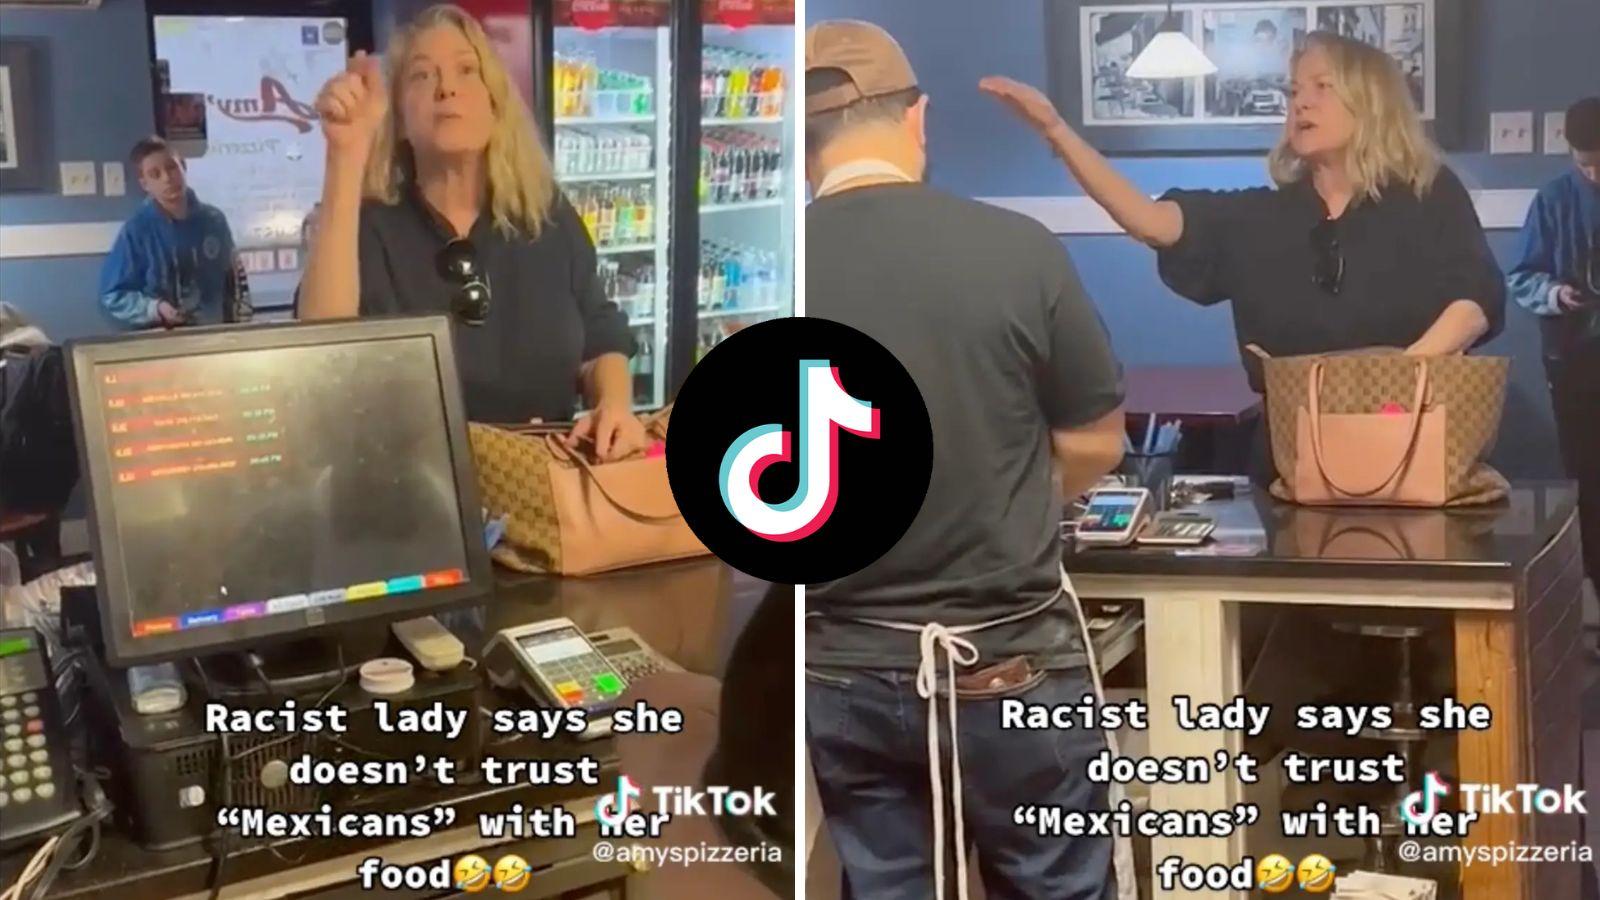 Woman's racist rant at Amy's Family Pizzeria in Hatboro goes viral